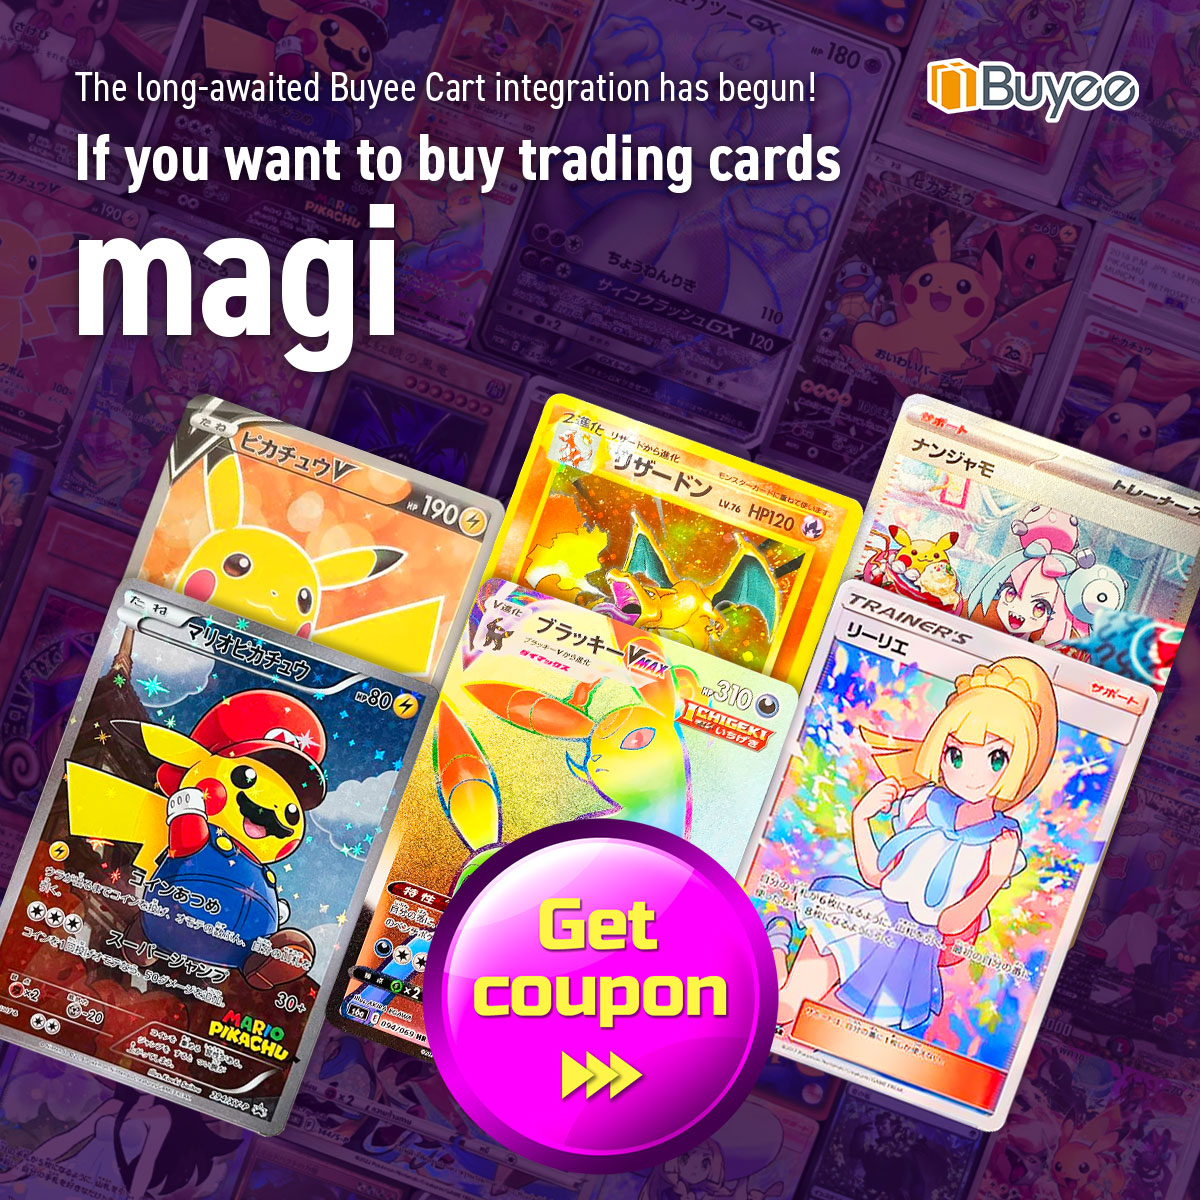 ONE DAY LEFT. Enjoy 0 Yen Buyee Service Fees on all purchases from Magi - Japan's largest trading card marketplace from April 2 to 15. Explore a vast selection of Pokémon cards, Yu-Gi-Oh!, and more! Shop here: tinyurl.com/a5r8z4wd #buyee #magi #pokemon